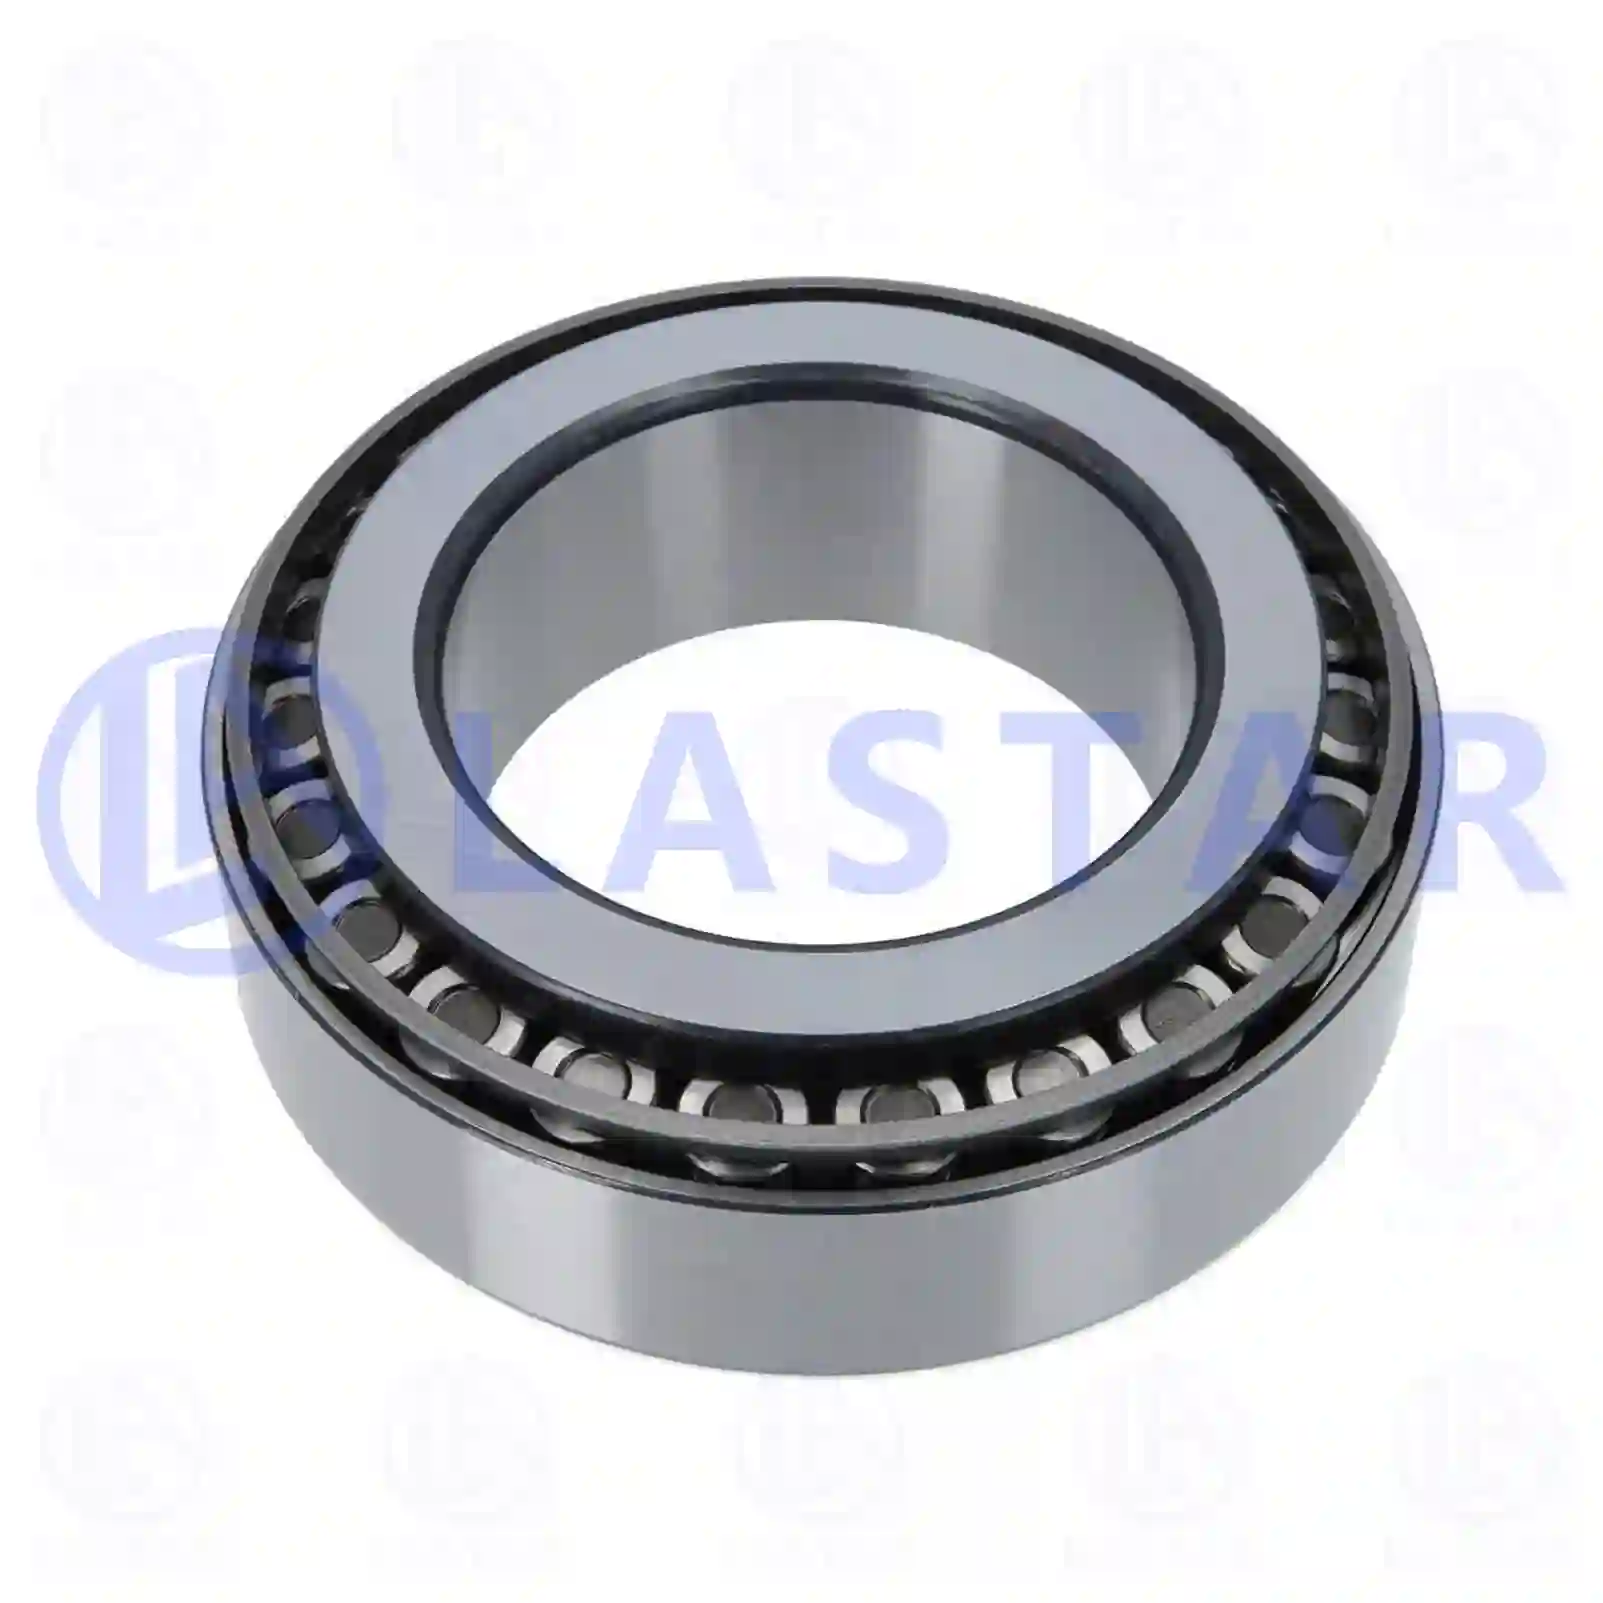 Bearings Tapered roller bearing, la no: 77725080 ,  oem no:0260089000, 0264089000, 0264089200, 0264102300, 07074945, 07174945, 10500582, 710500582, 07074945, 07174945, 42103253, 7174945, 86650, 06324906500, 81440500073, 4200100900, 014440, ZG02980-0008 Lastar Spare Part | Truck Spare Parts, Auotomotive Spare Parts